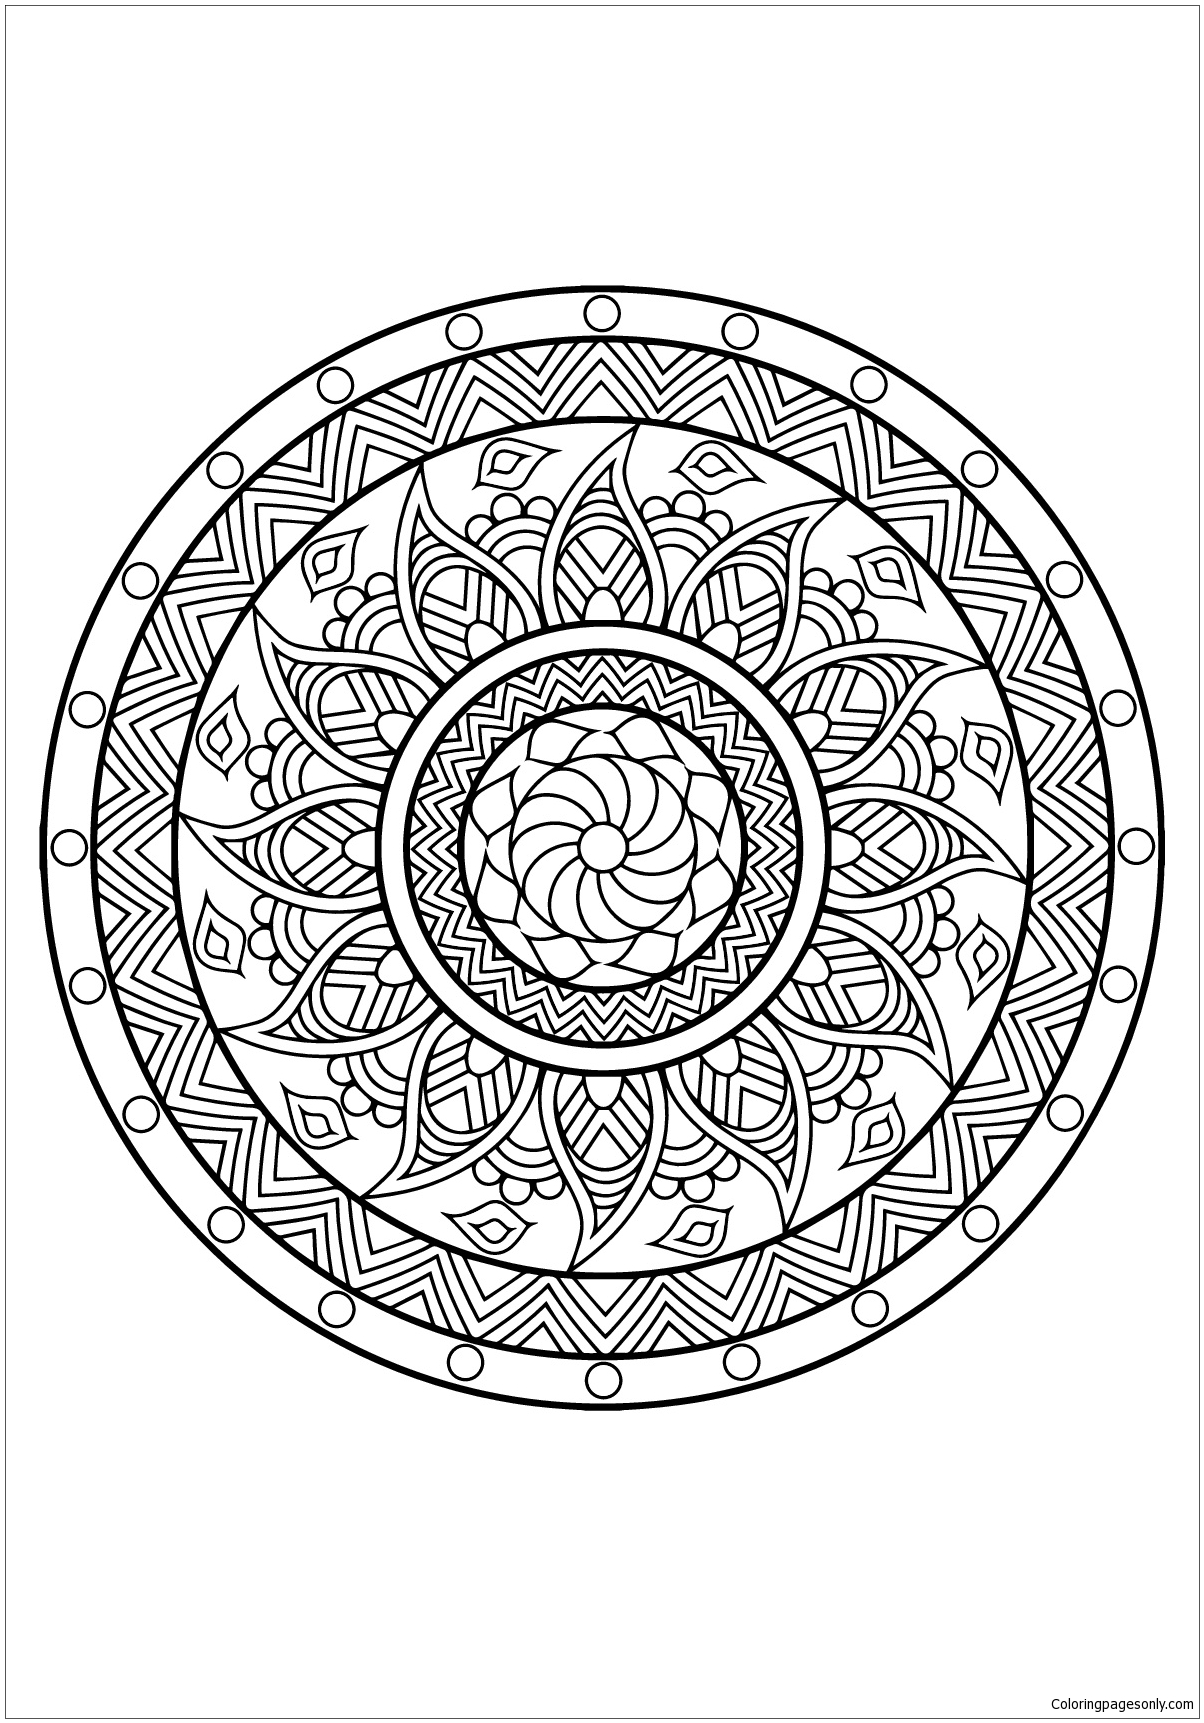 Mandala For Adults 2 Coloring Page